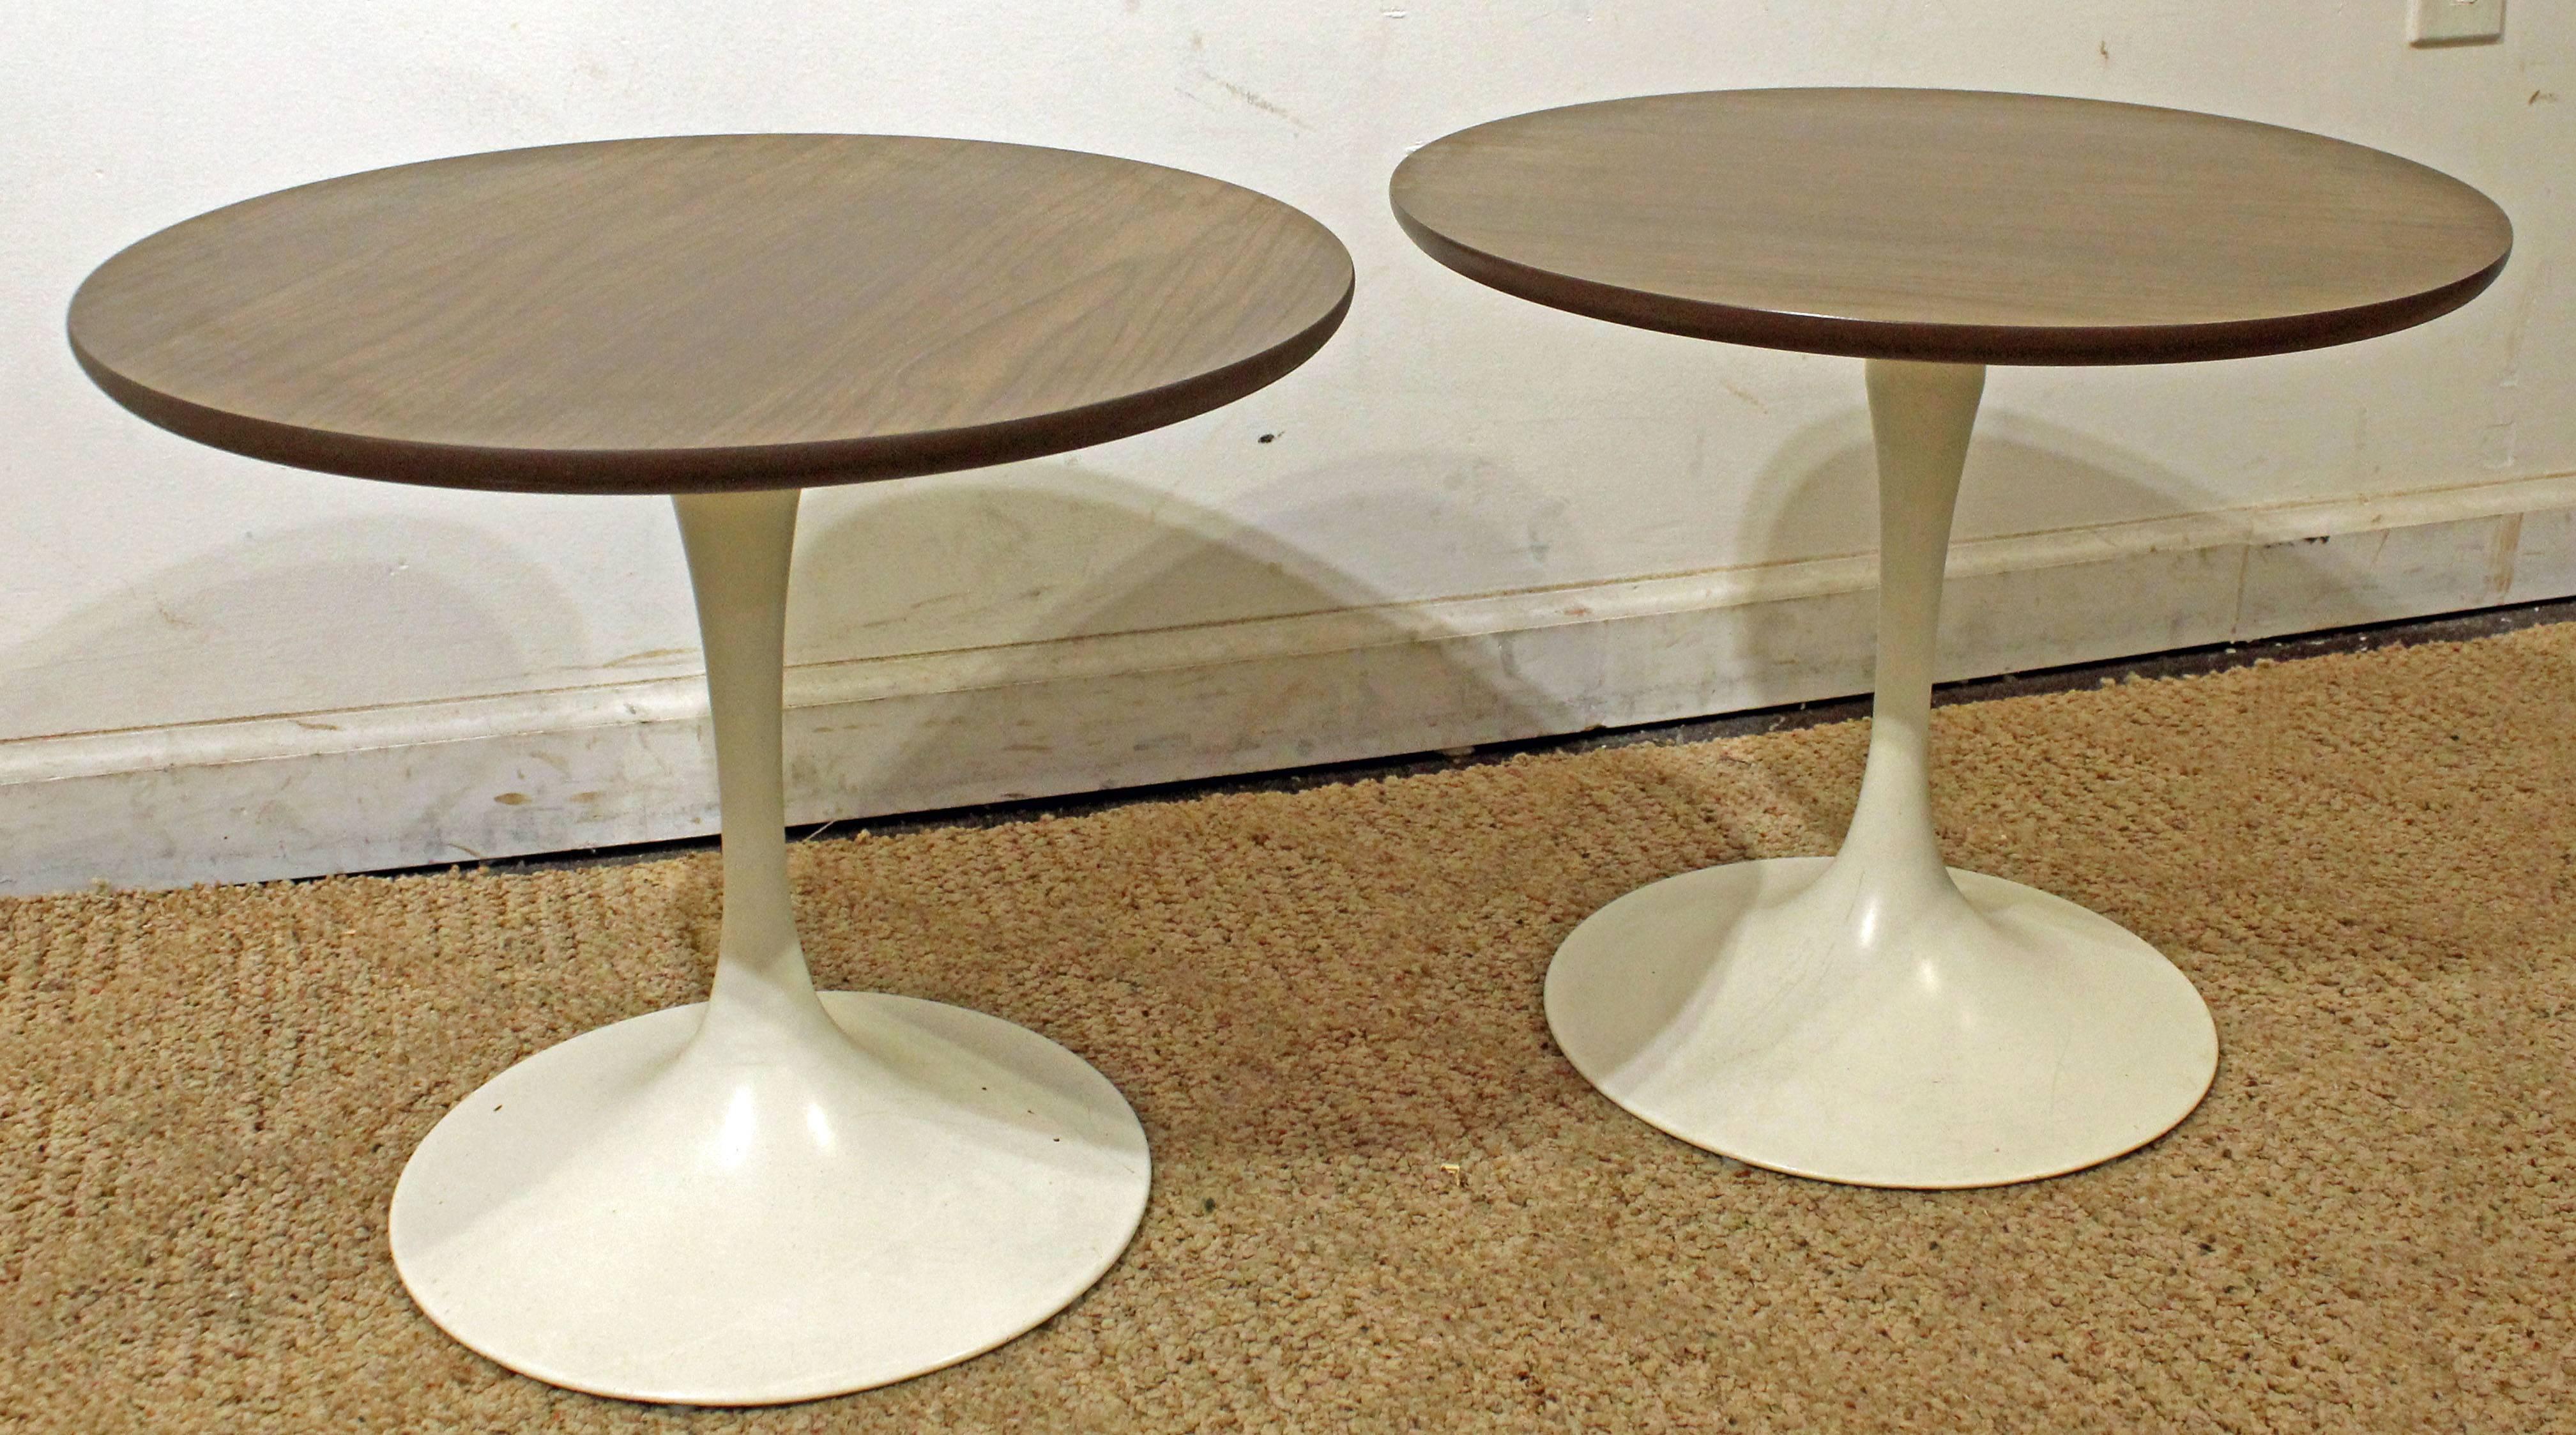 This set includes two side tables with laminate tops and metal bases, similar to the style of Eero Saarinen. They are not signed.